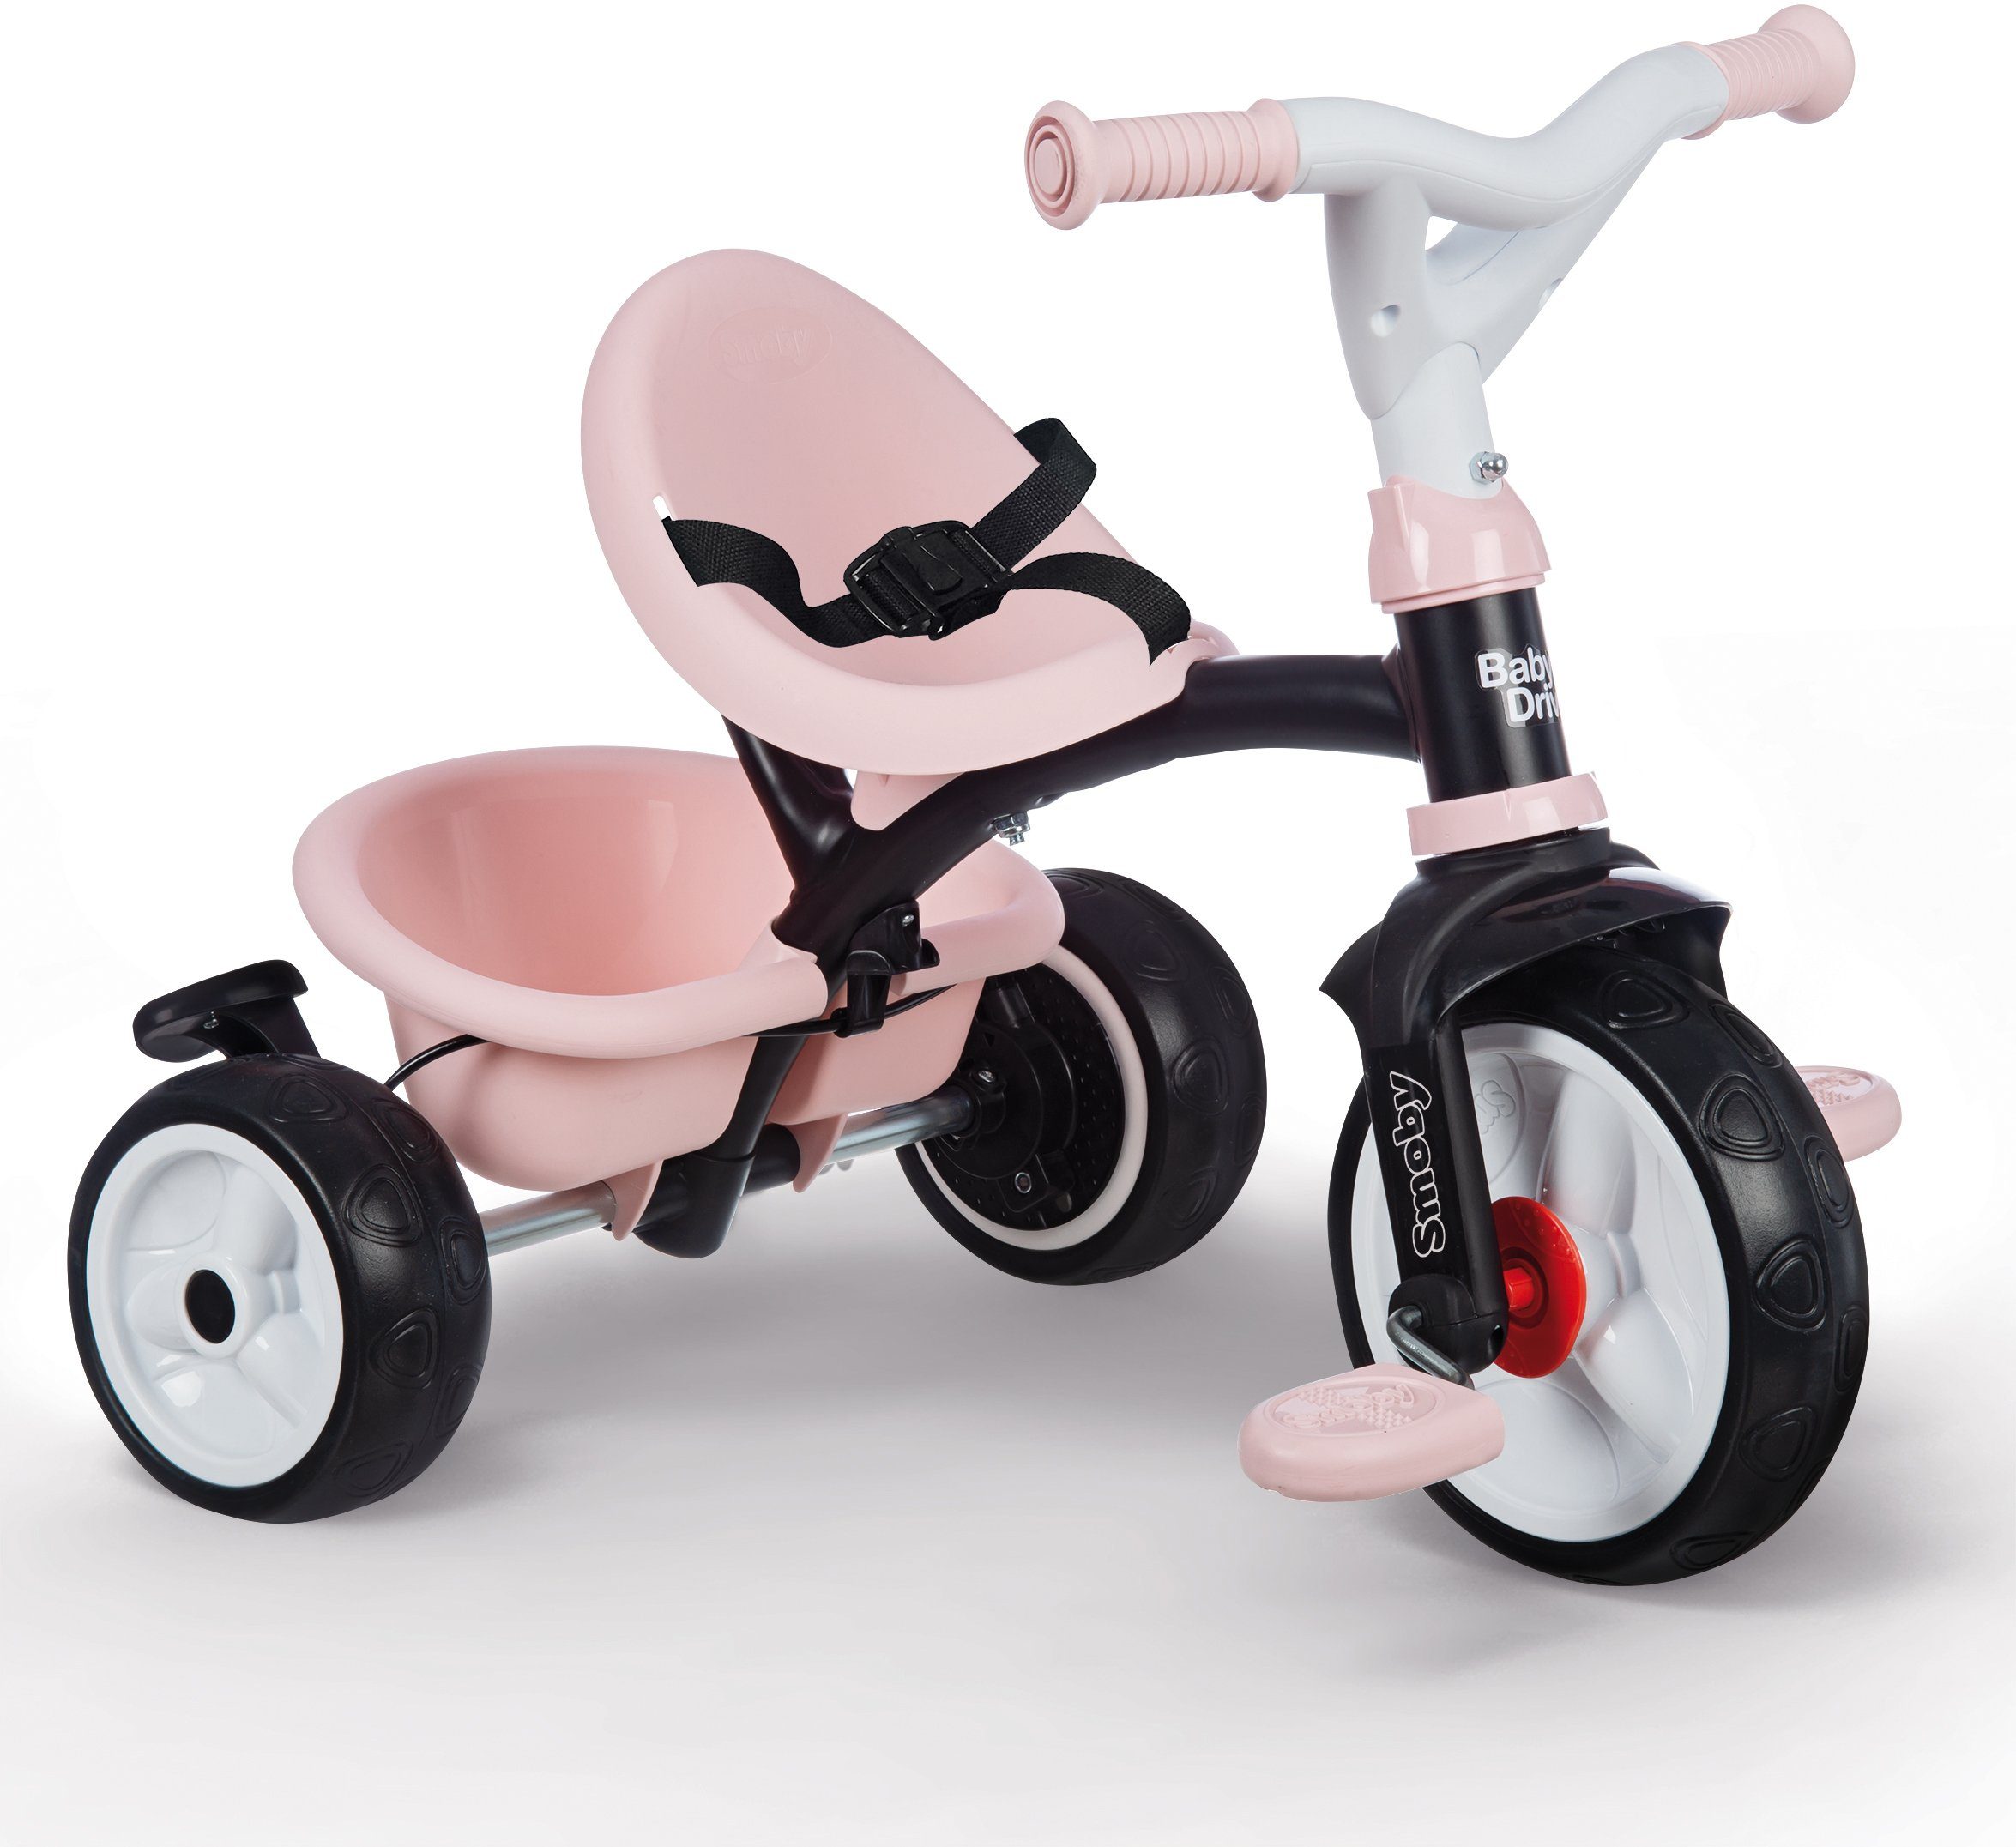 Baby Made Dreirad Smoby rosa, in Driver Plus, Europe